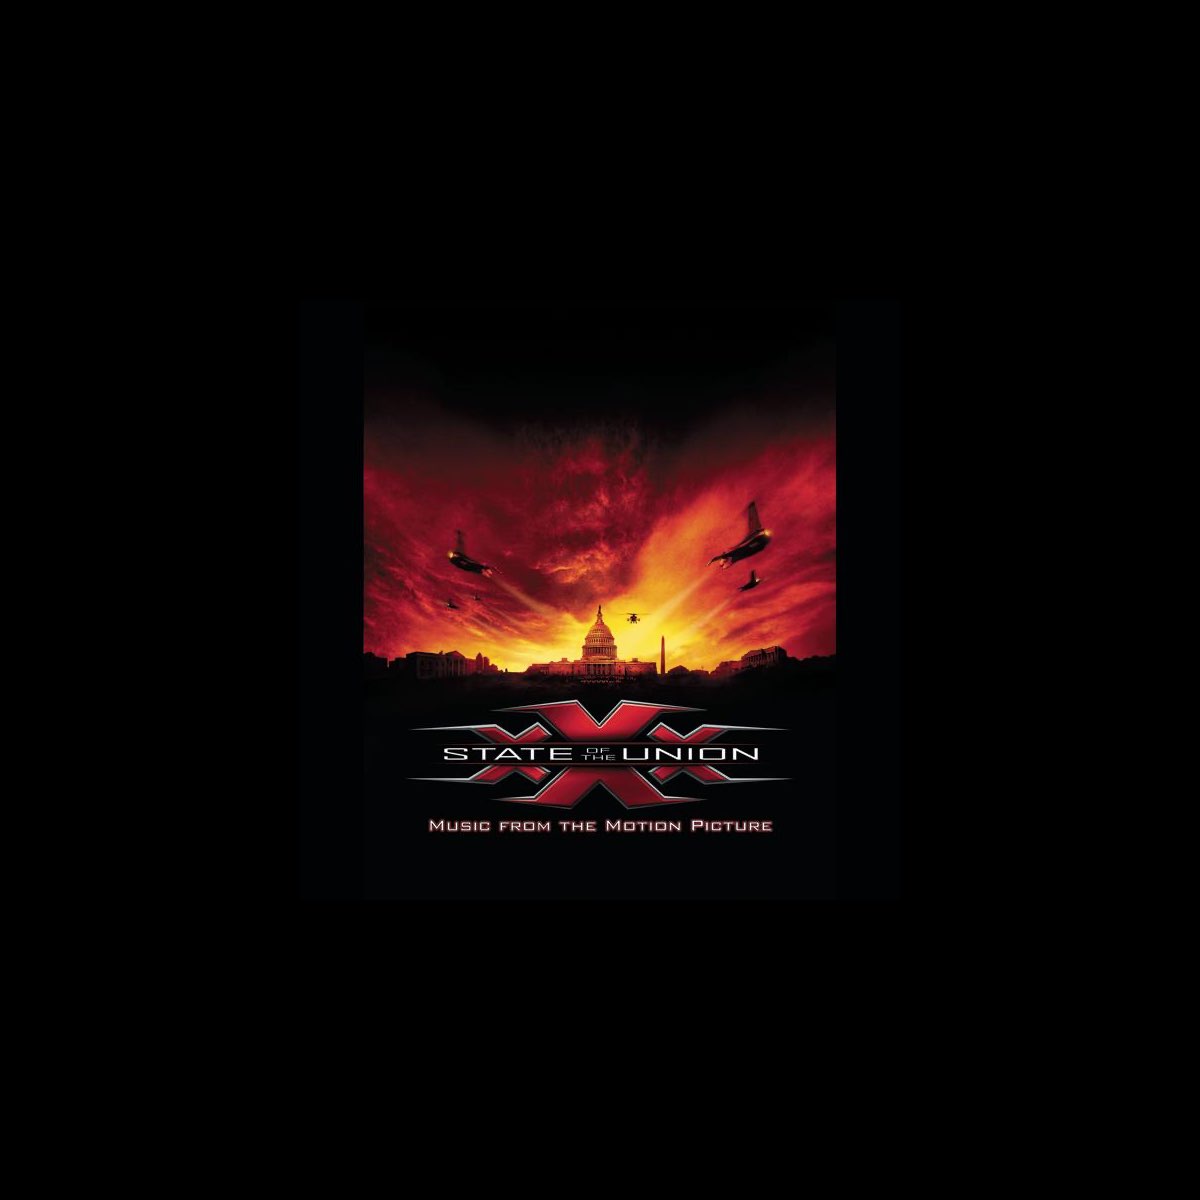 Wwwdatcomxxx - XXX: State of the Union (Music from the Motion Picture) - Album by Various  Artists - Apple Music